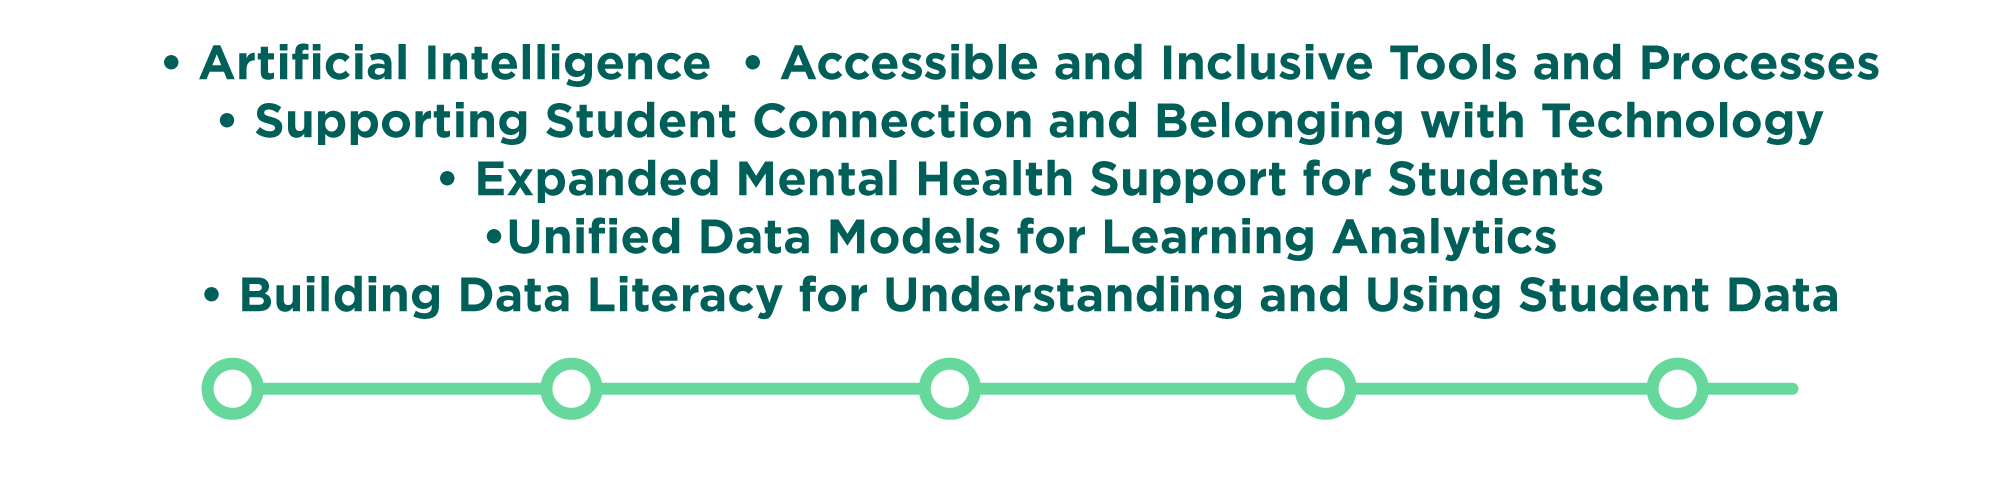 Artificial Intelligence; Accessible and Inclusive Tools and Processes; Supporting Student Connection and Belonging with Technology; Expanded Mental Health Support for Students; Unified Data Models for Learning Analytics; Building Data Literacy for Understanding and Using Student Data